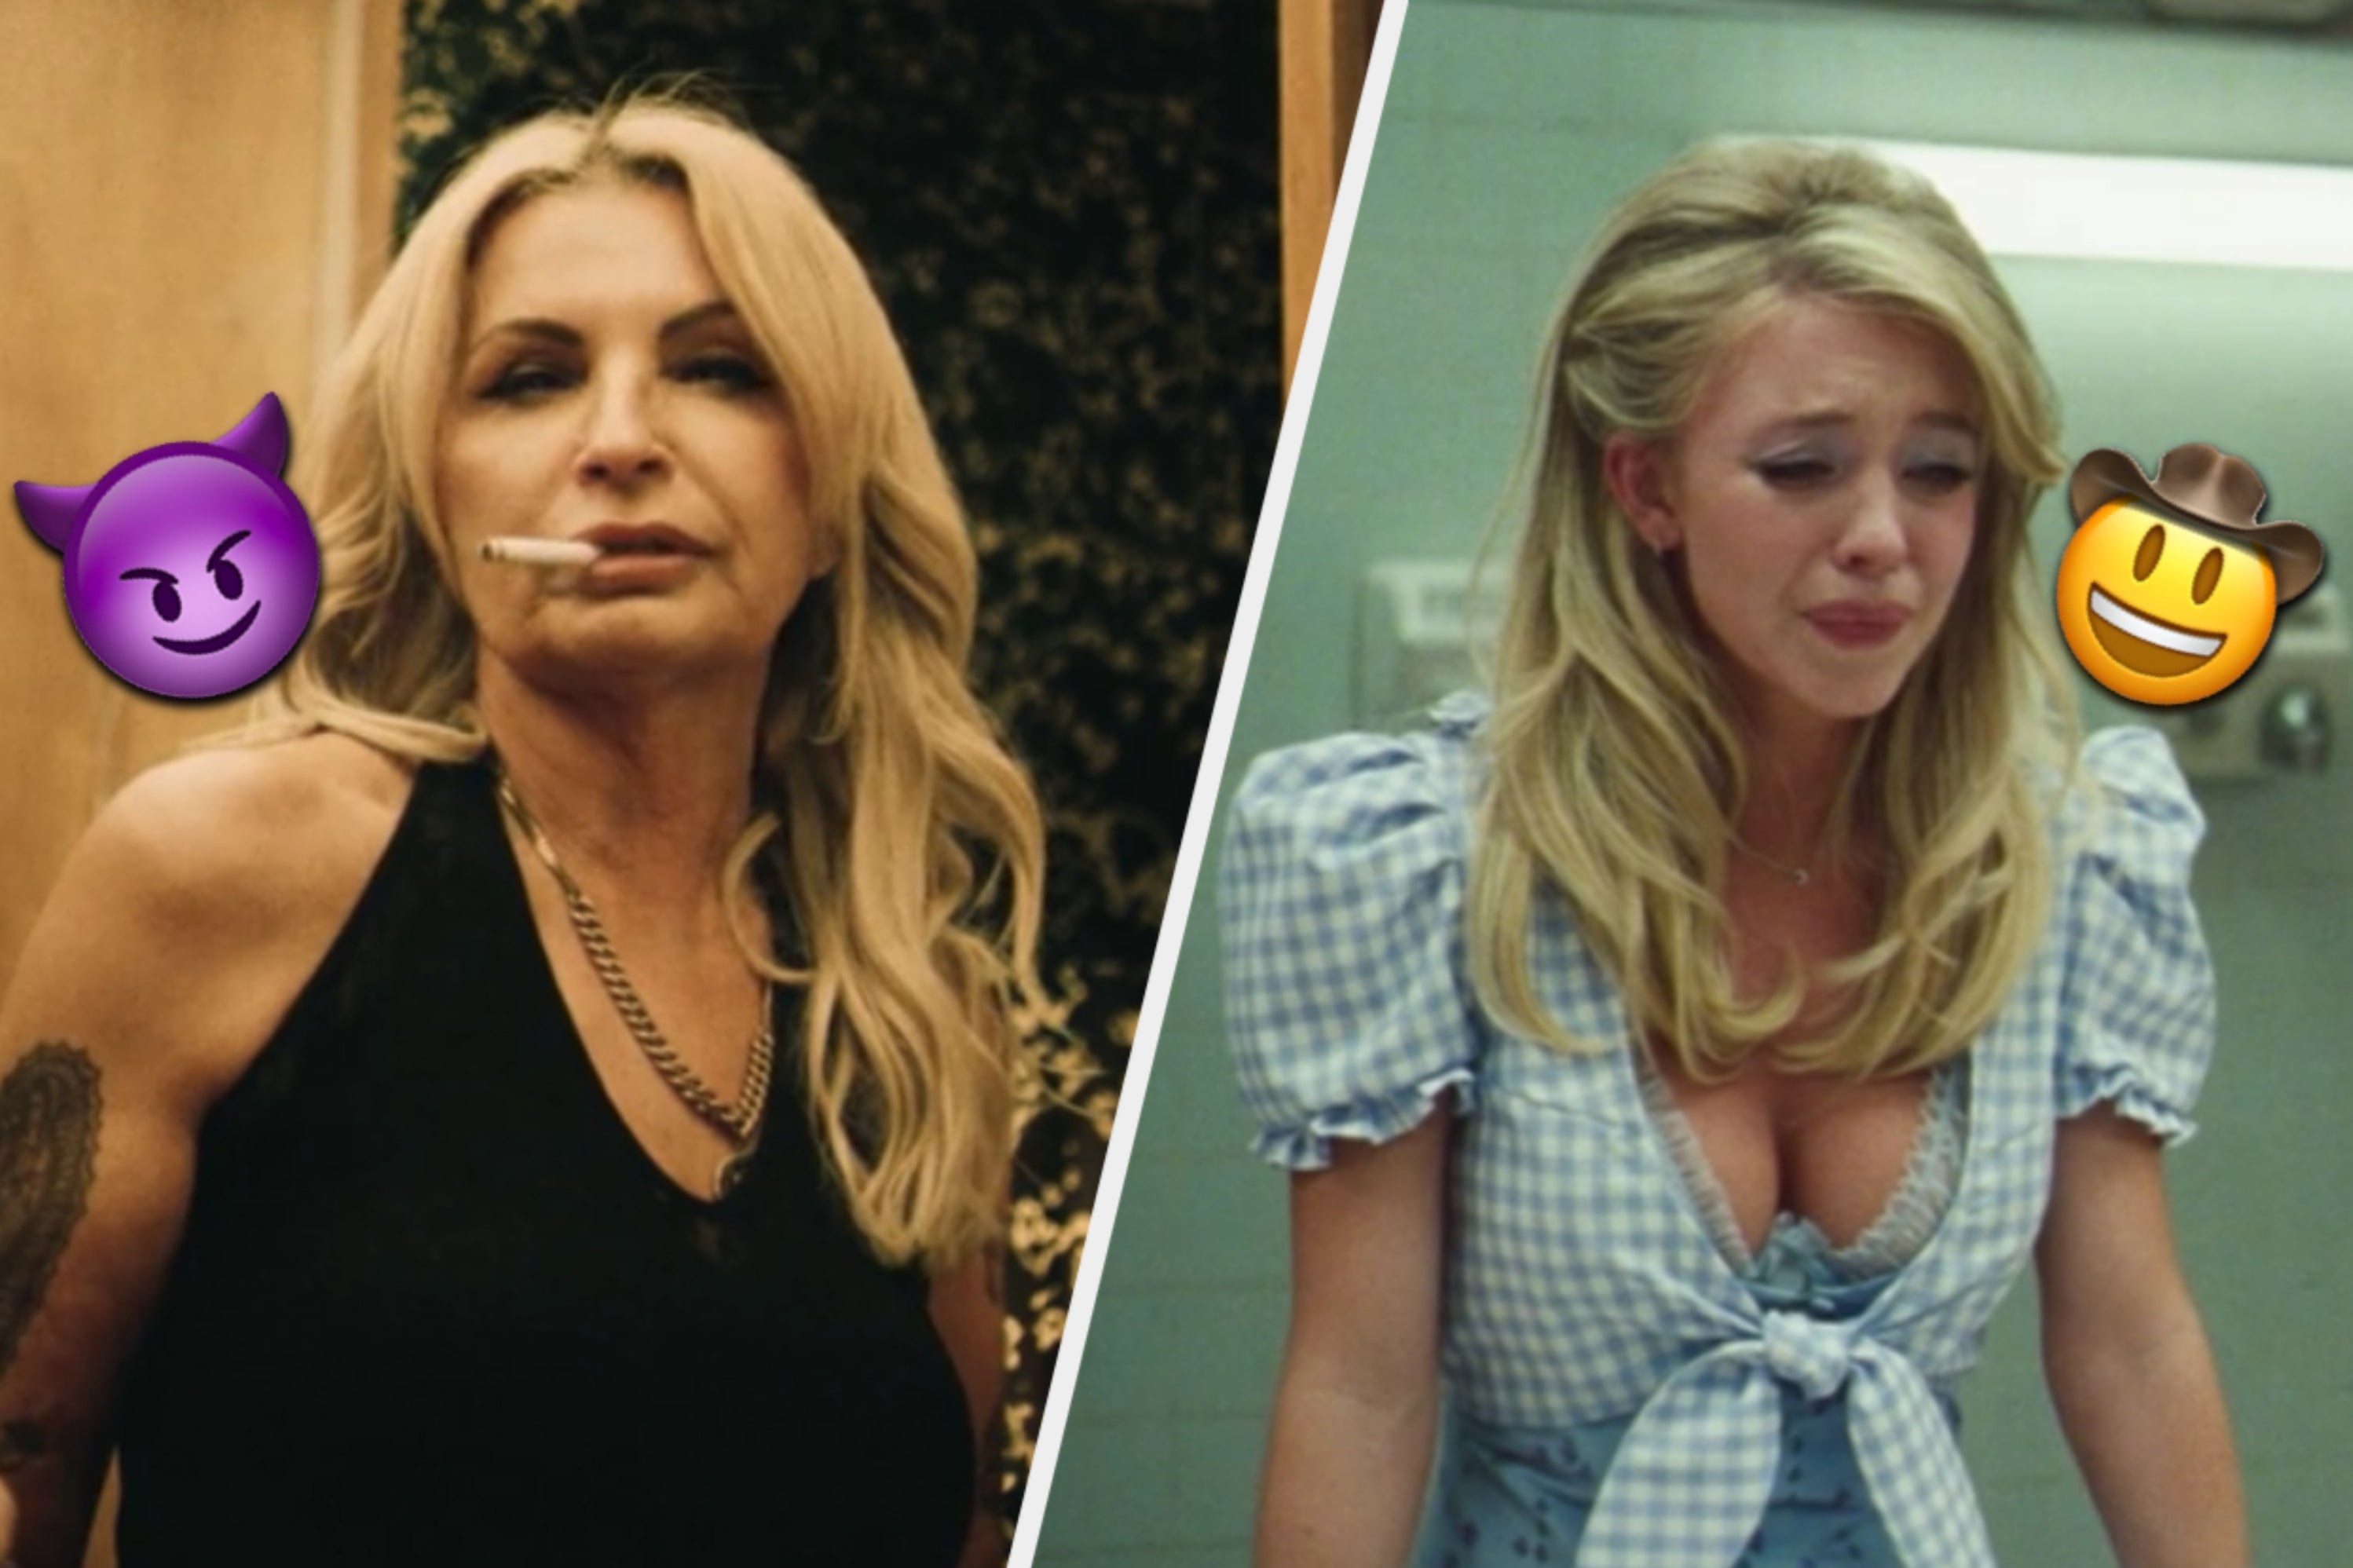 On the left: photo of Fez&#x27;s grandma smoking. On the right: photo of Cassie in Oklahoma-inspired outfit